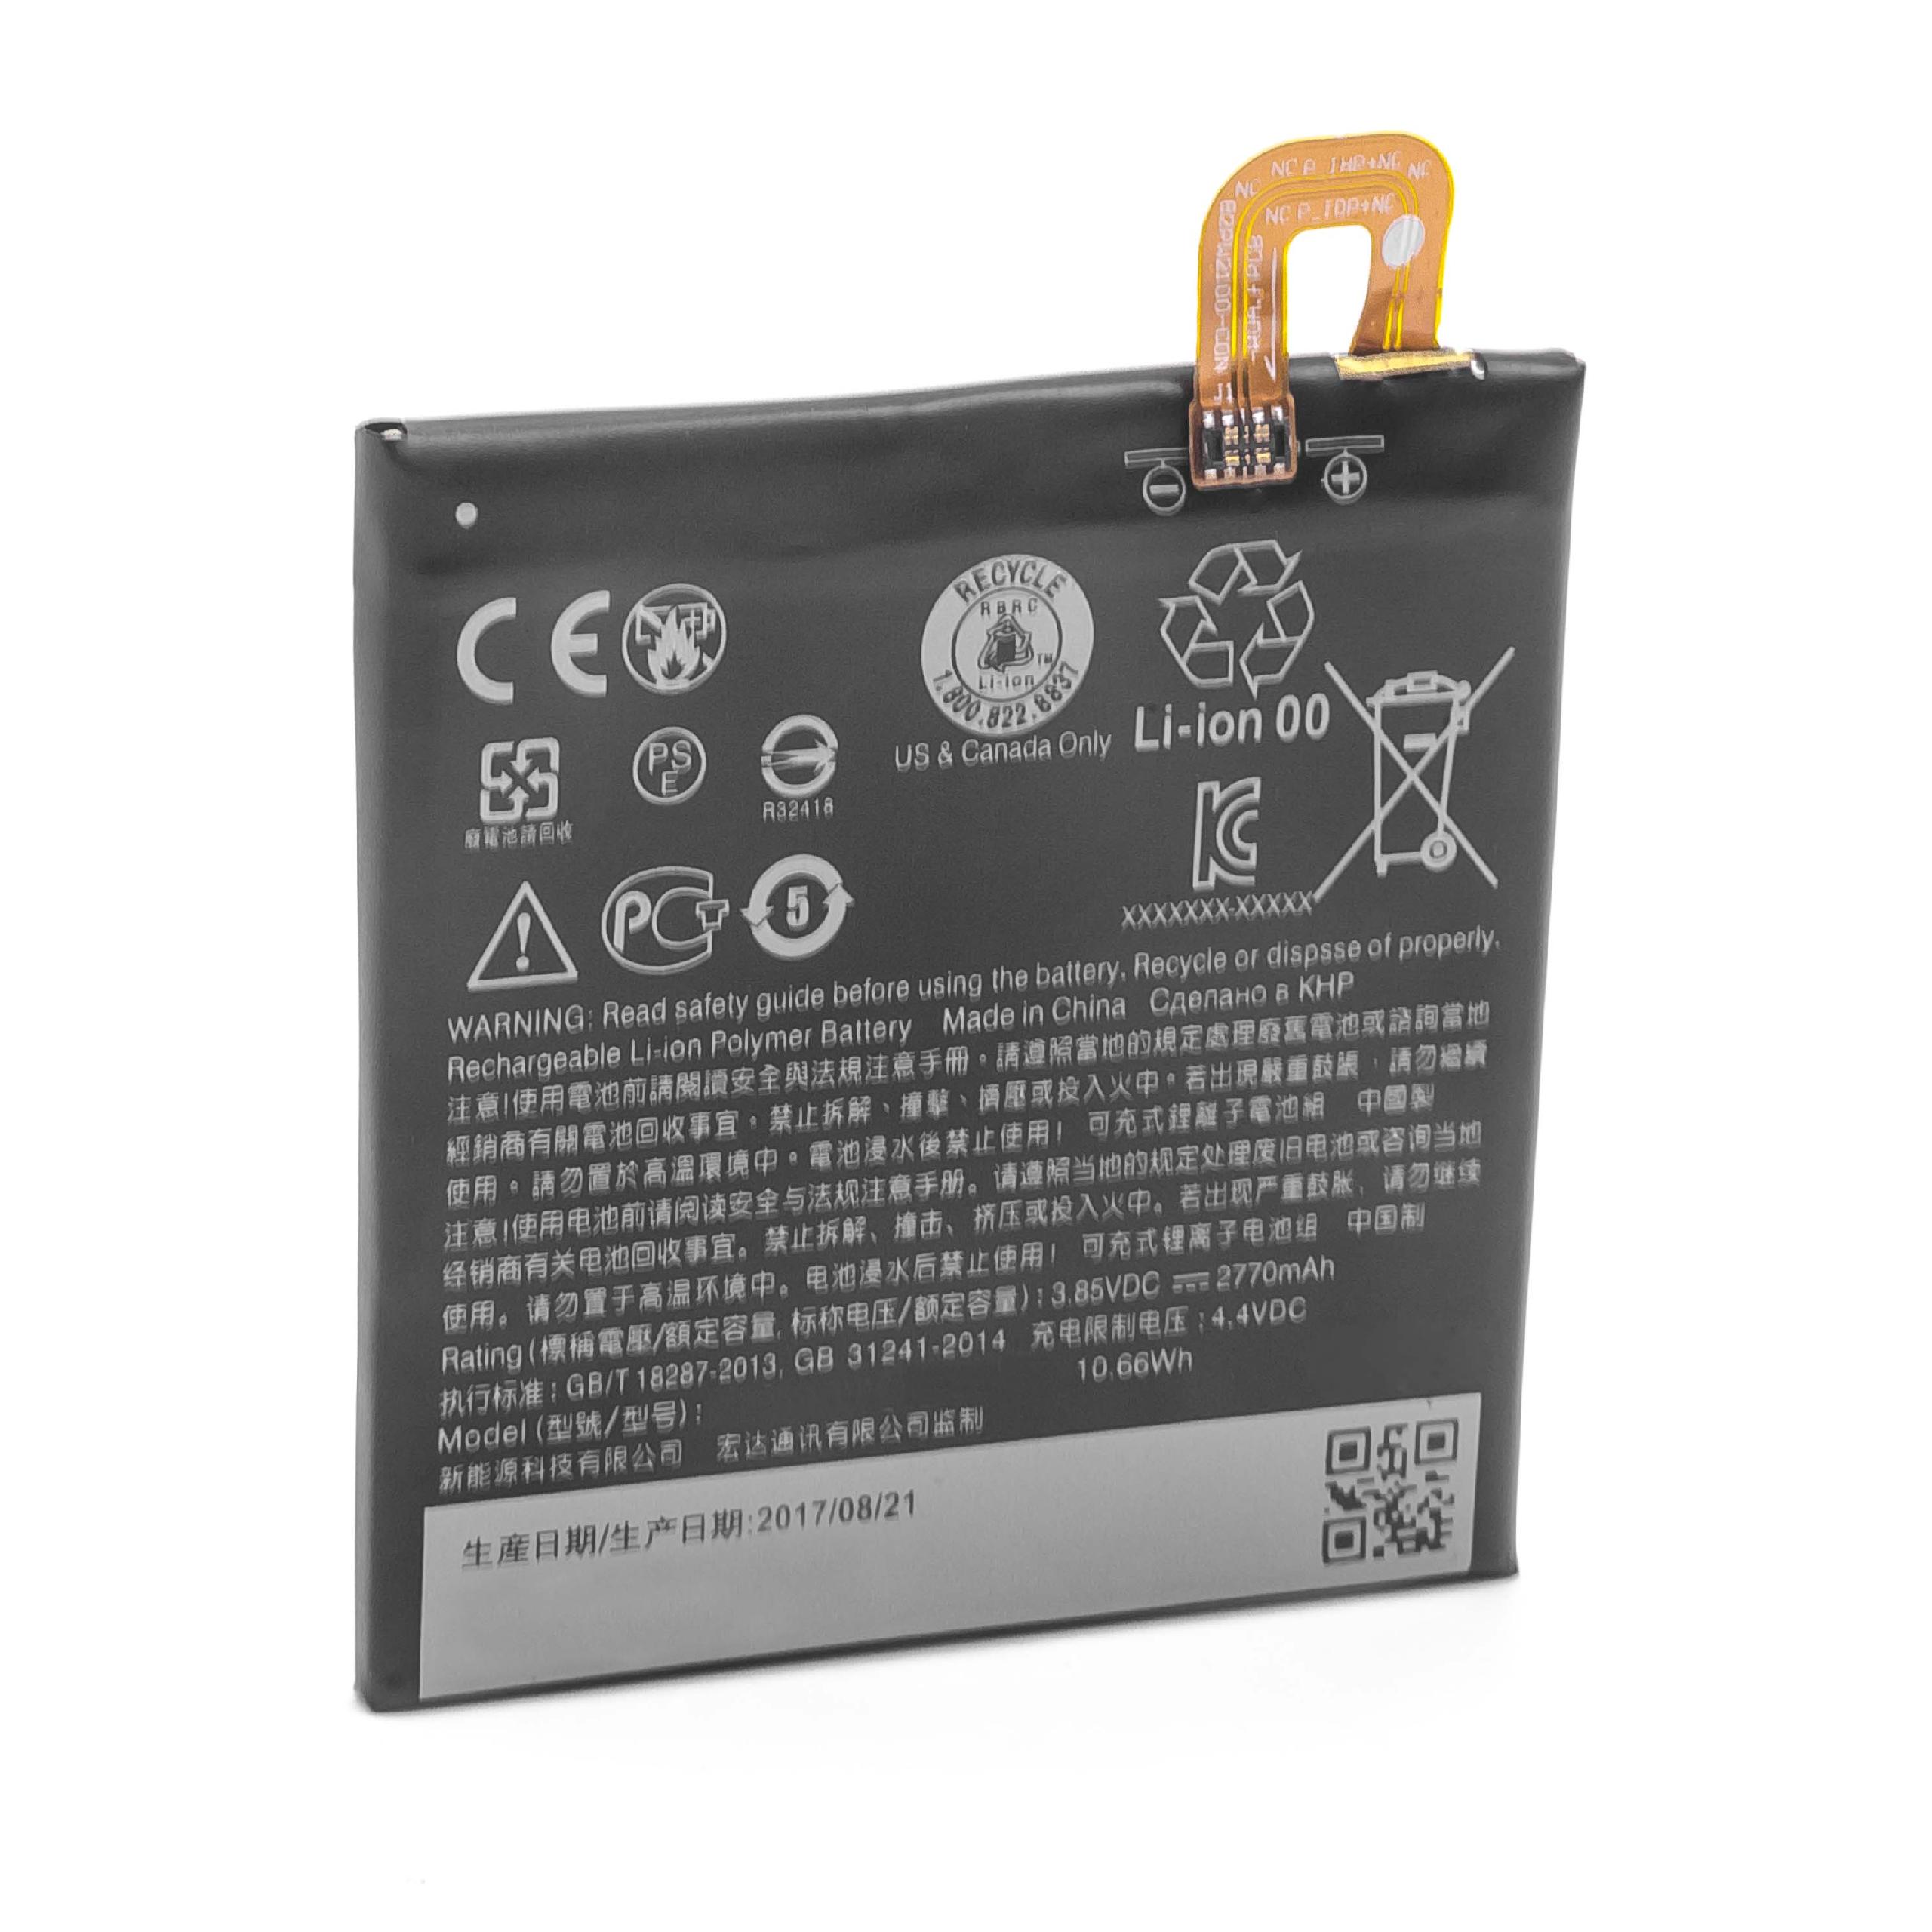 Mobile Phone Battery Replacement for Google 35H00262-00M, B2PW4100 - 2700mAh 3.85V Li-polymer